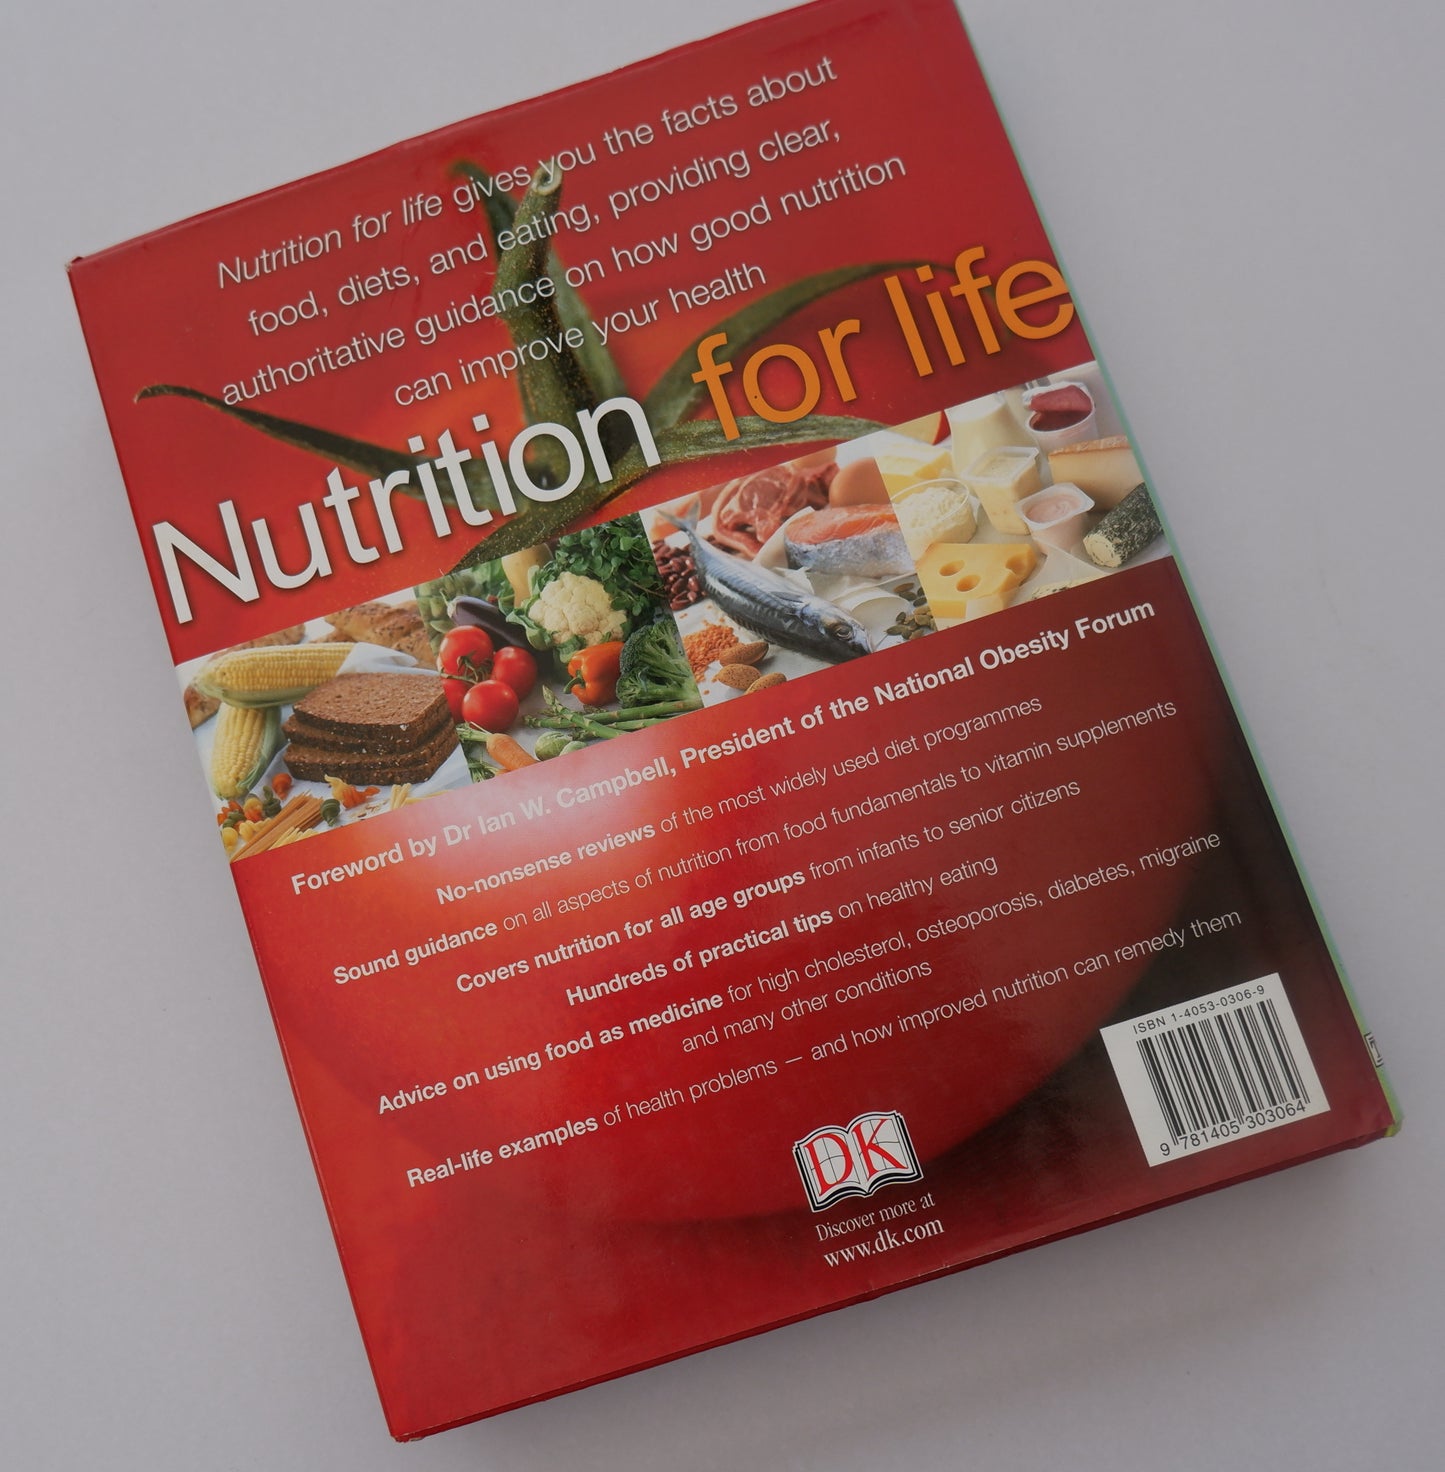 Nutrition for Life: the definitive guide to eating well for good health - Darwin Deen (Author), Lisa Hark (Author)